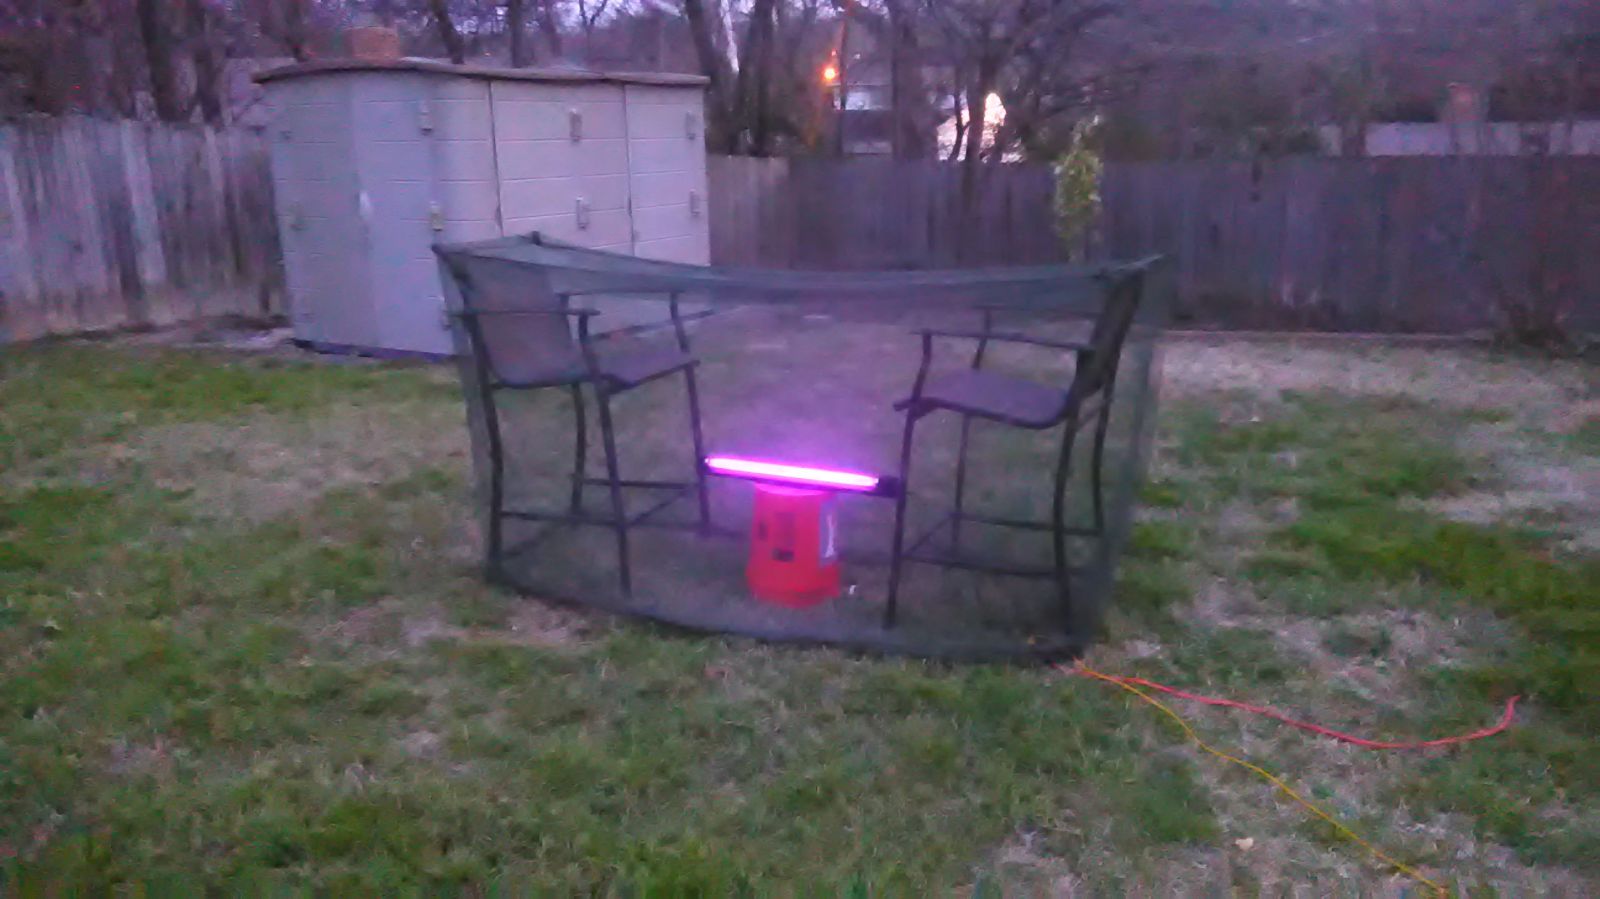 blacklight setup with mosquito netting.